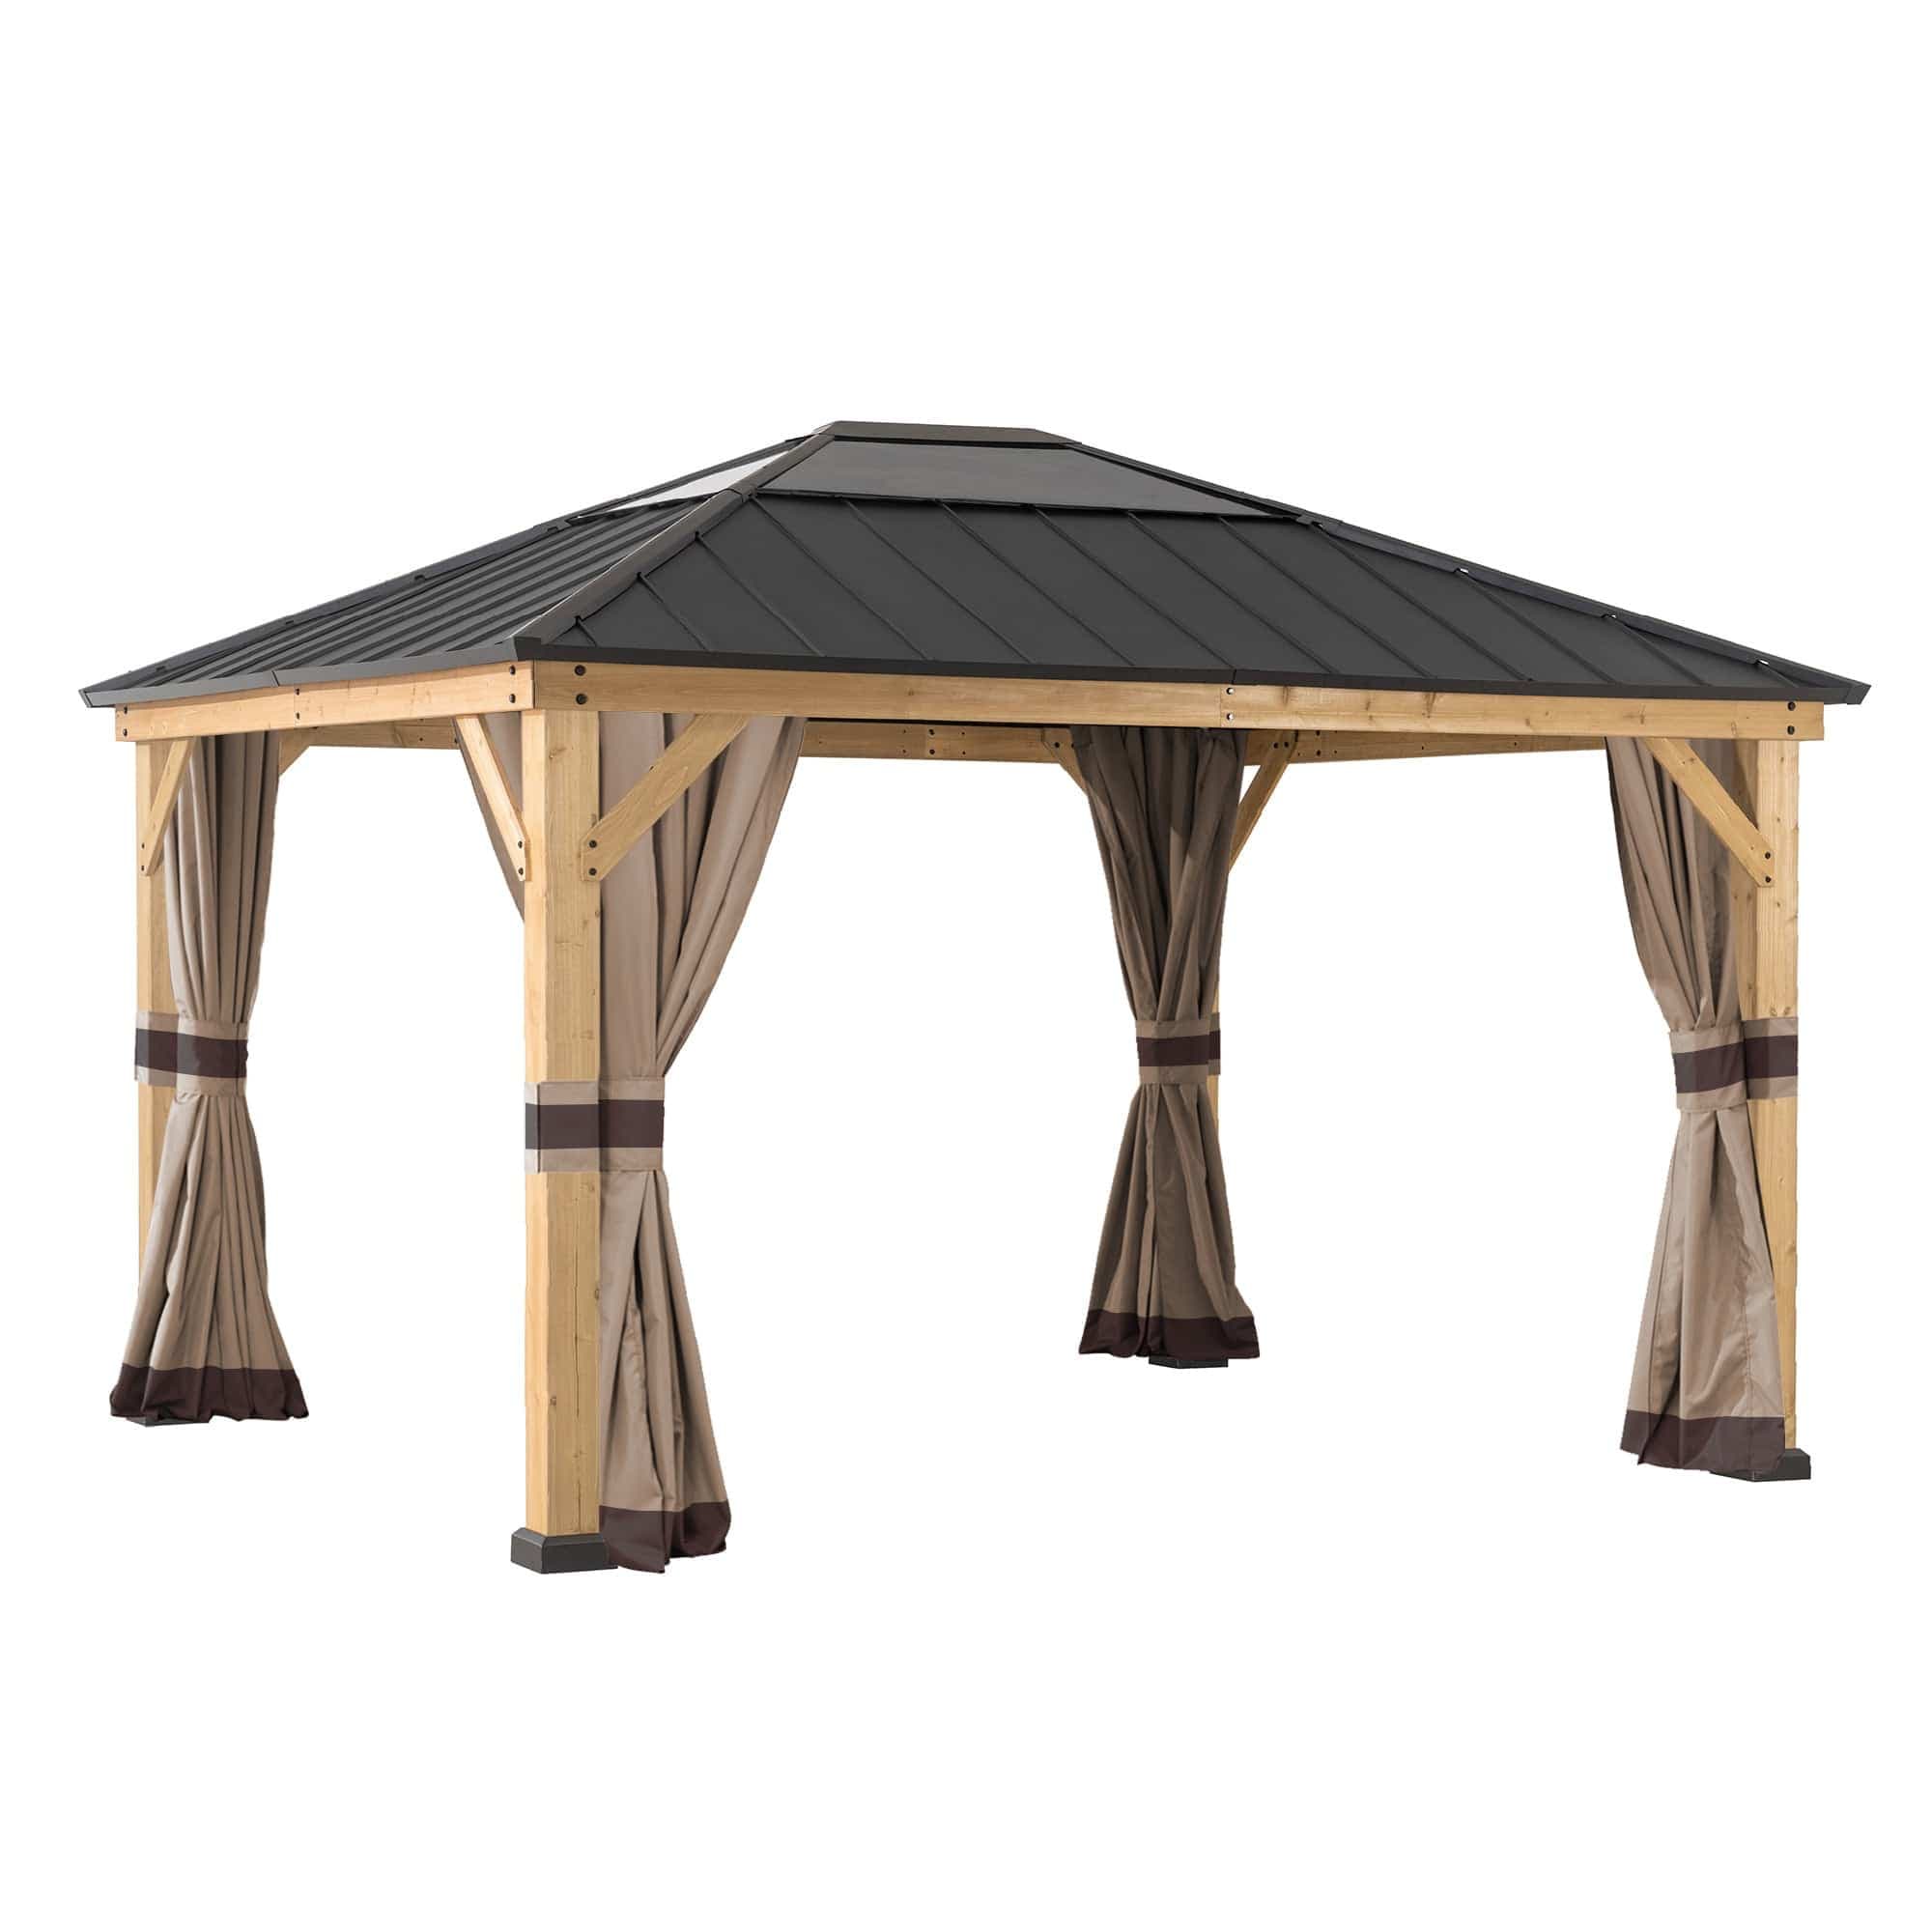 Sunjoy Replacement Universal Curtains for 13 ft. × 15 ft. Wood-Framed Gazebos.